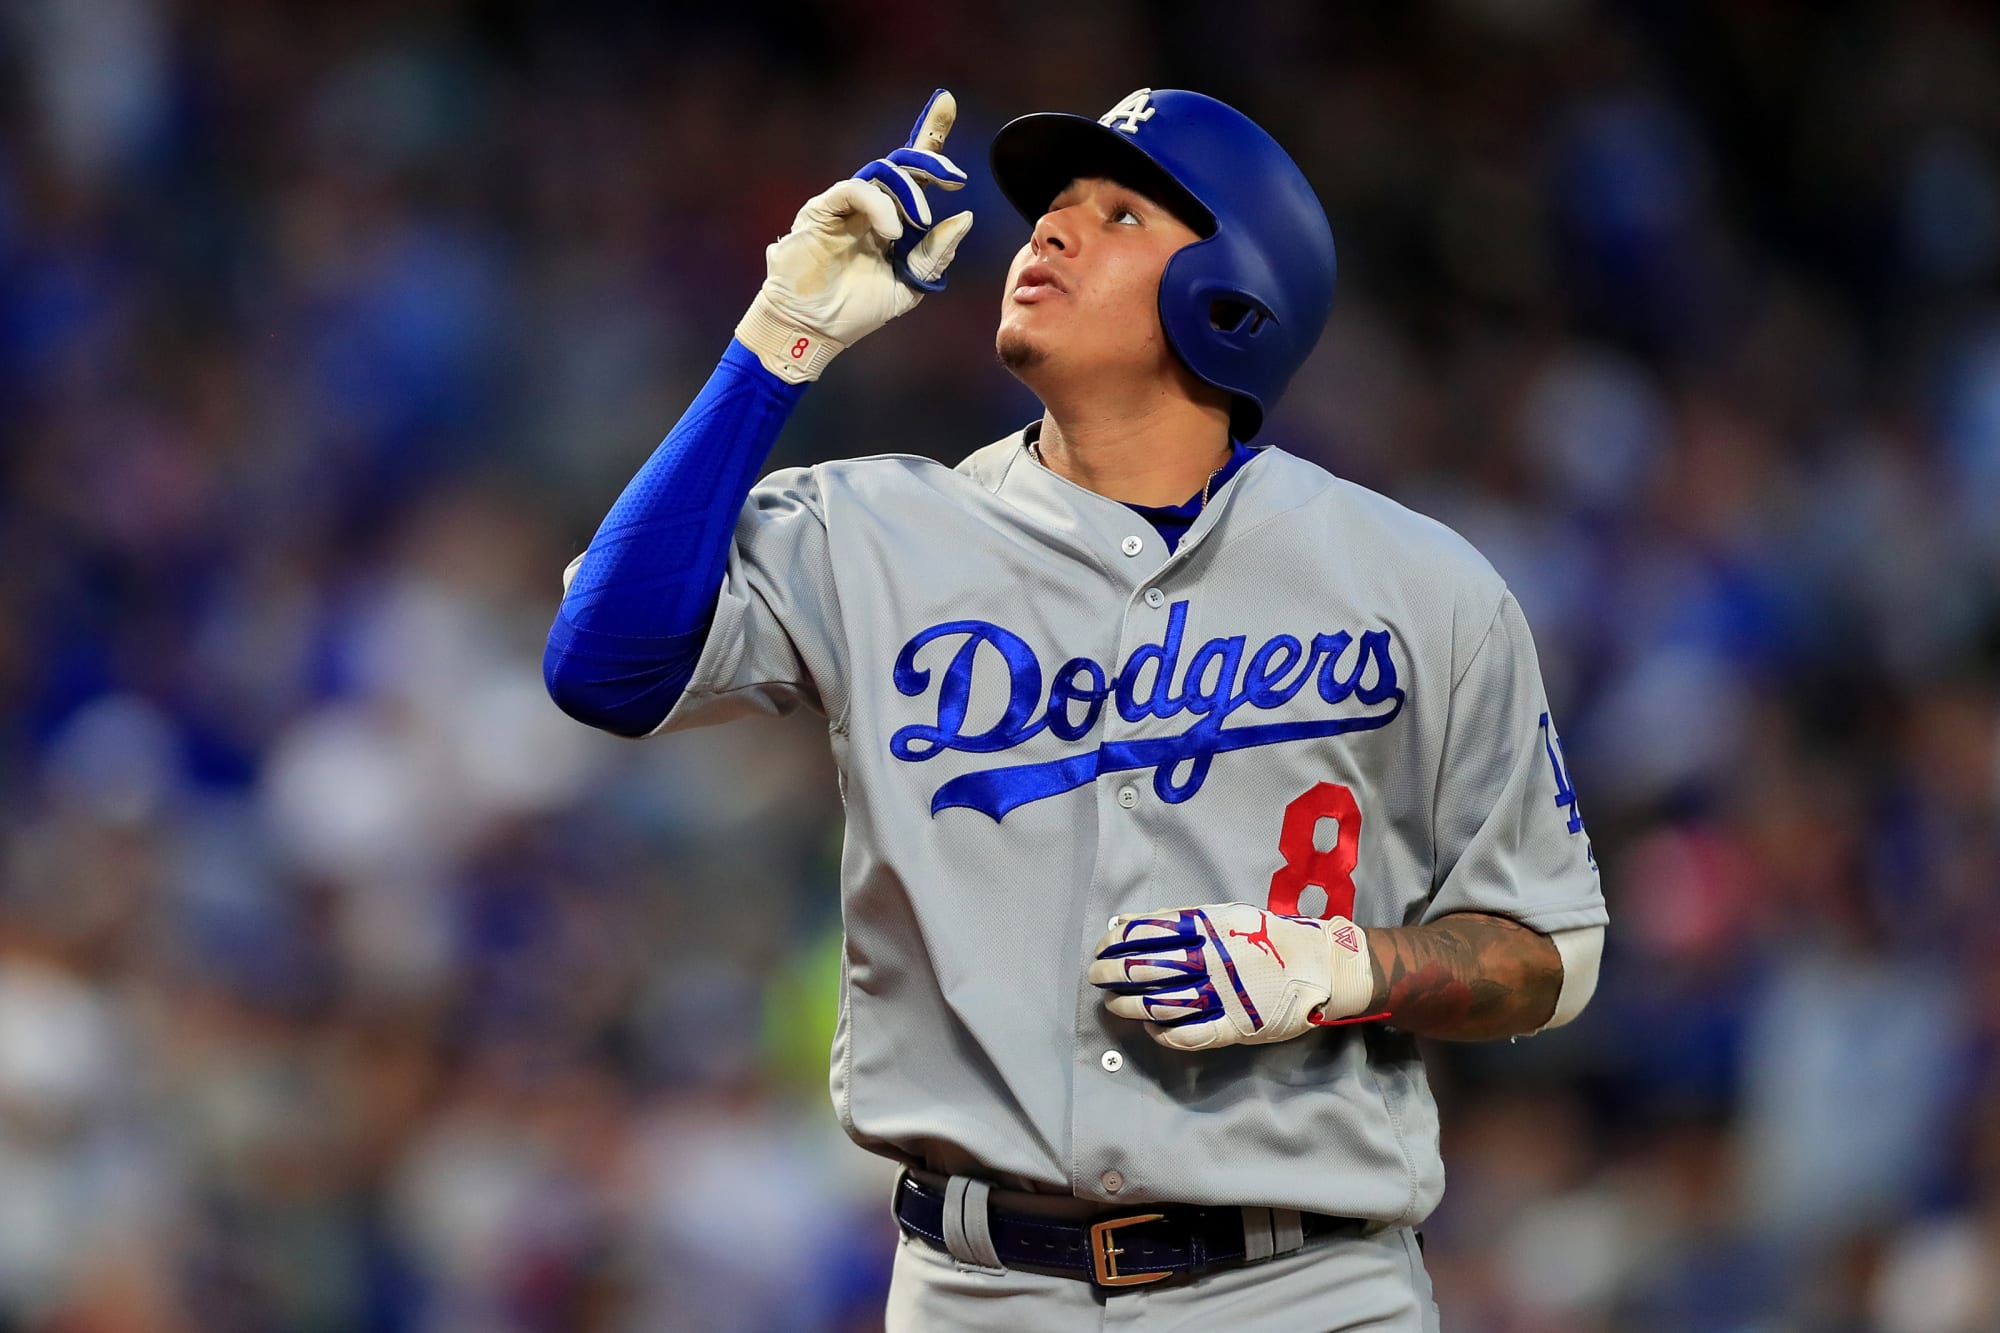 Los Angeles Dodgers Home runs needed for first place